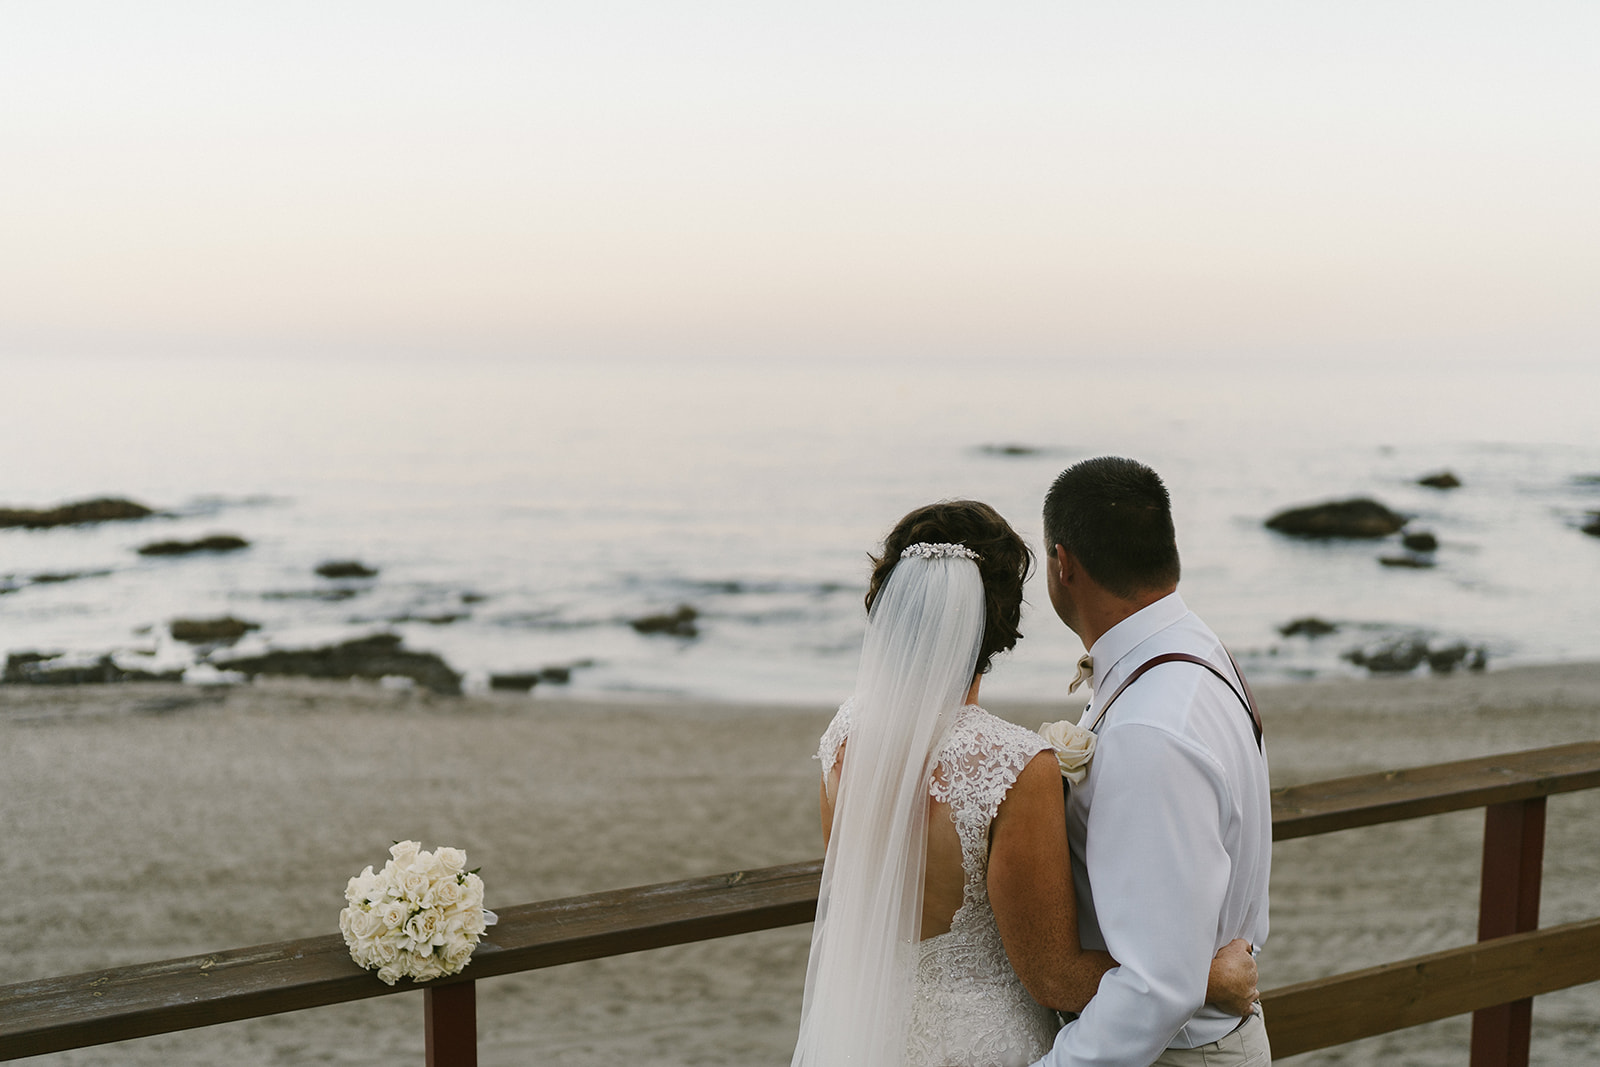 Wedding on the beach in Spain, photo by Andreas Holm